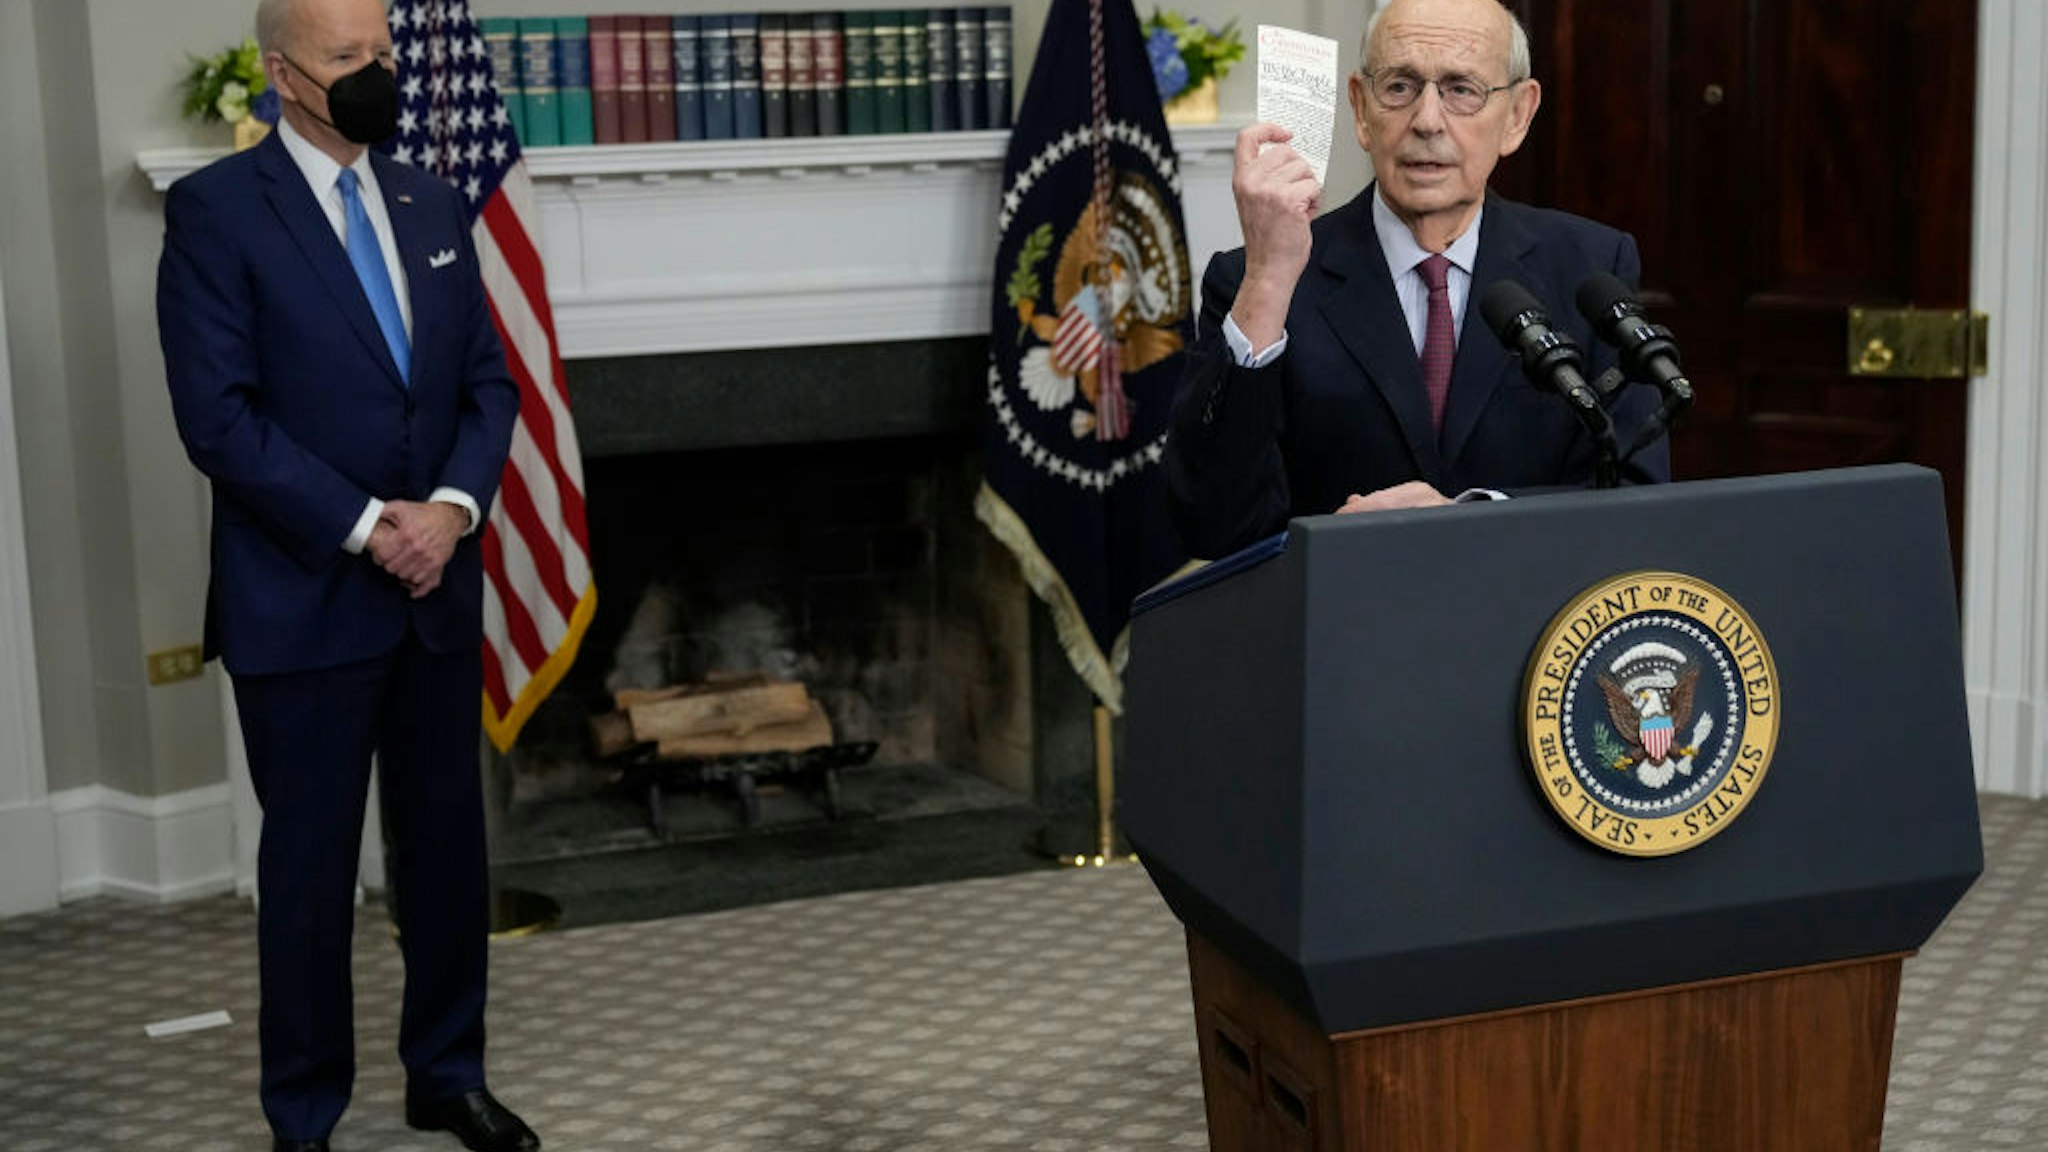 WASHINGTON, DC - JANUARY 27: Retiring U.S. Supreme Court Justice Stephen Breyer (R) speaks alongside President Joe Biden, during a retirement ceremony at the White House on January 27, 2022 in Washington, DC. Appointed by President Bill Clinton, Breyer has been on the court since 1994. His retirement creates an opportunity for President Joe Biden, who has promised to nominate a Black woman for his first pick to the highest court in the country. (Photo by Drew Angerer/Getty Images)